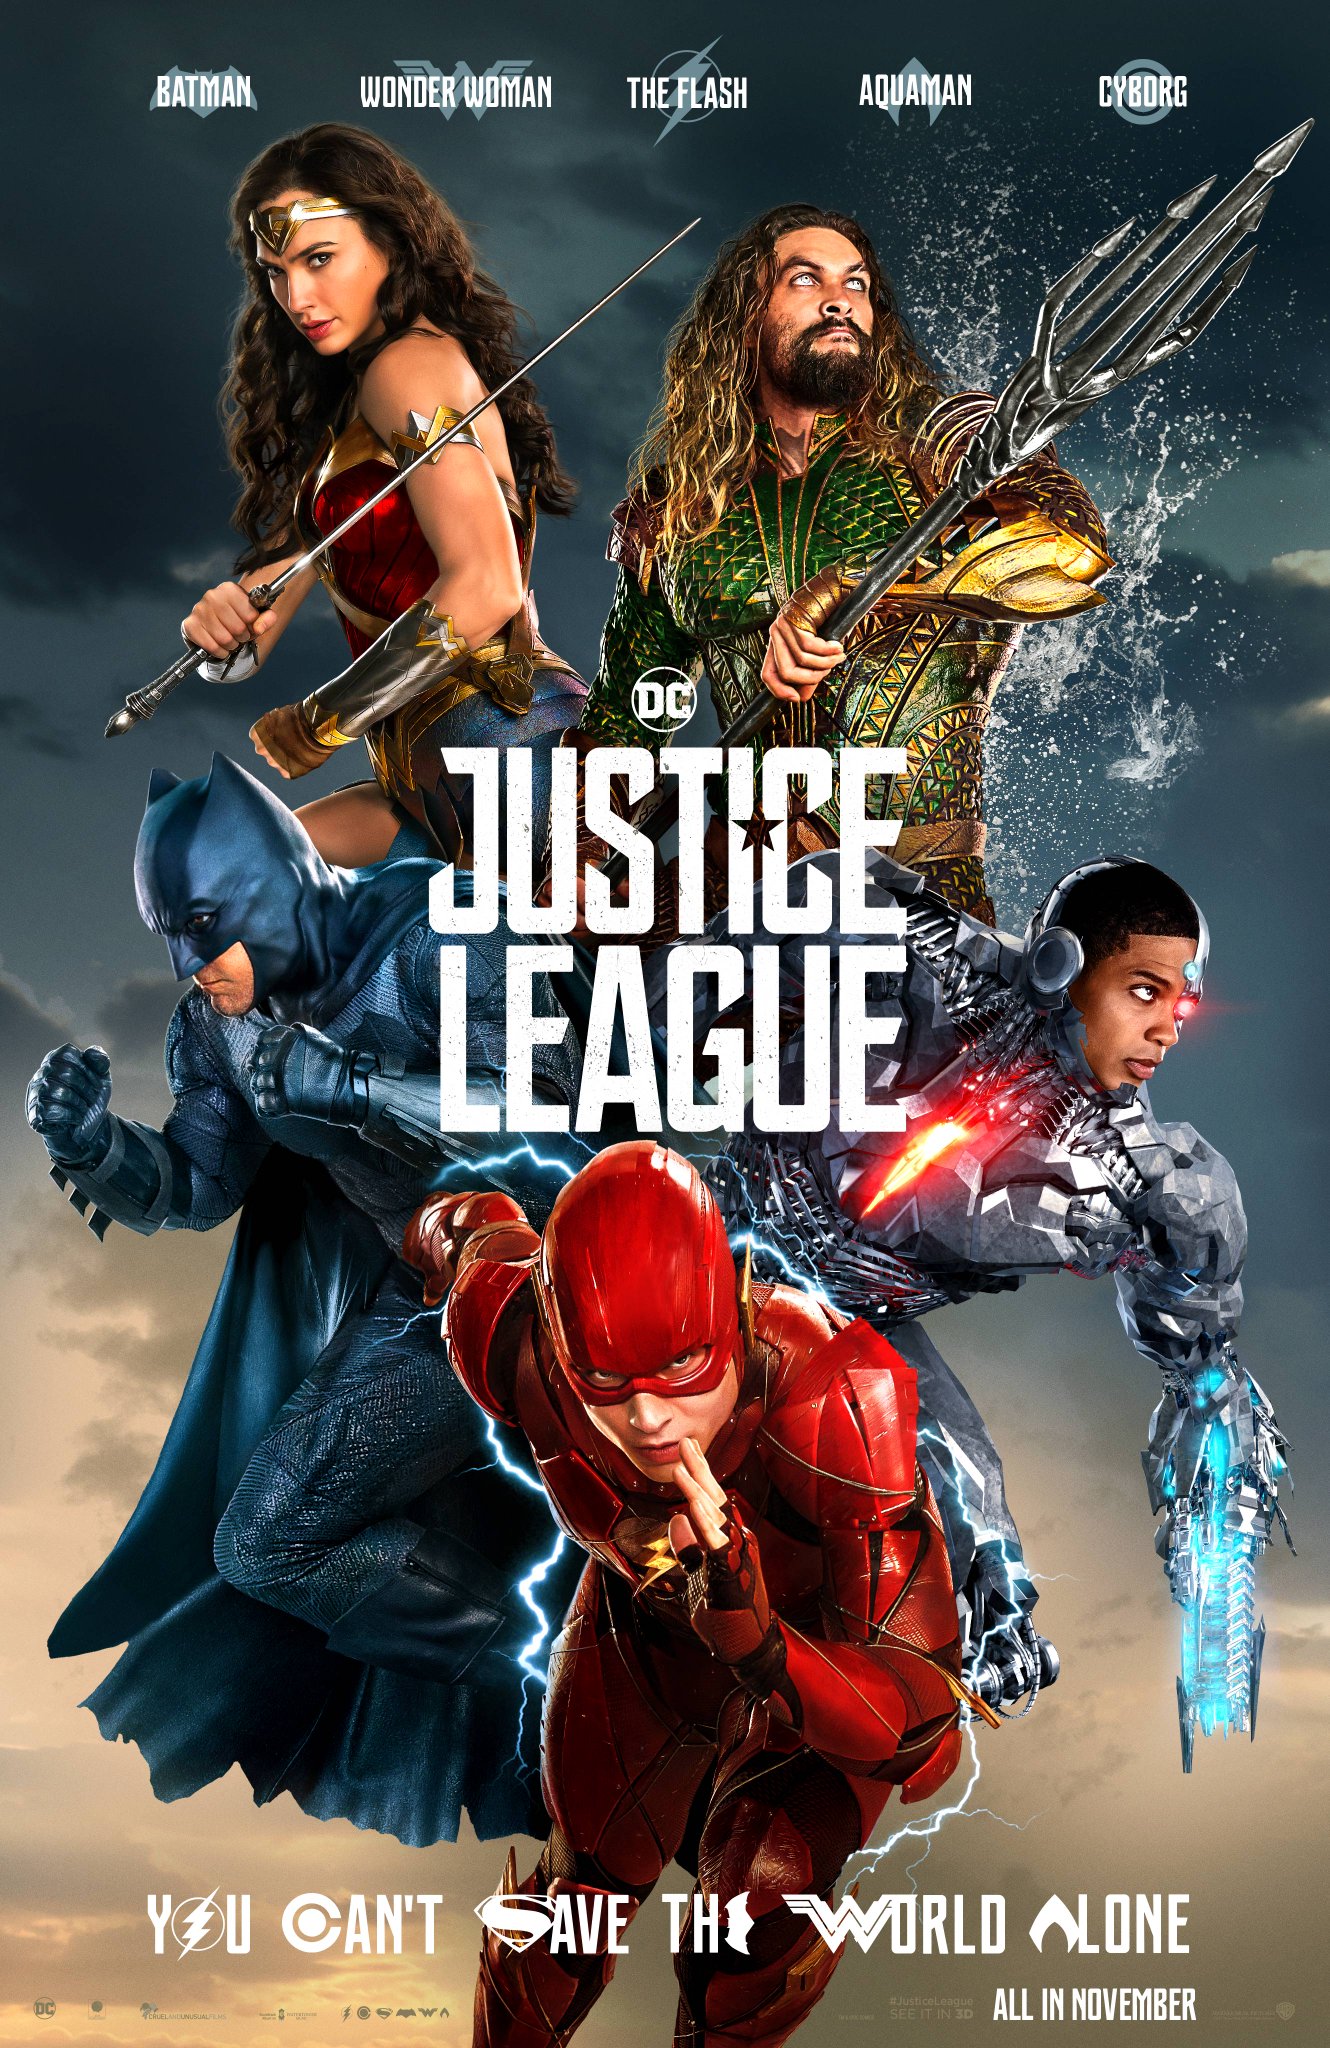 New Colorful “Justice League” Movie Poster